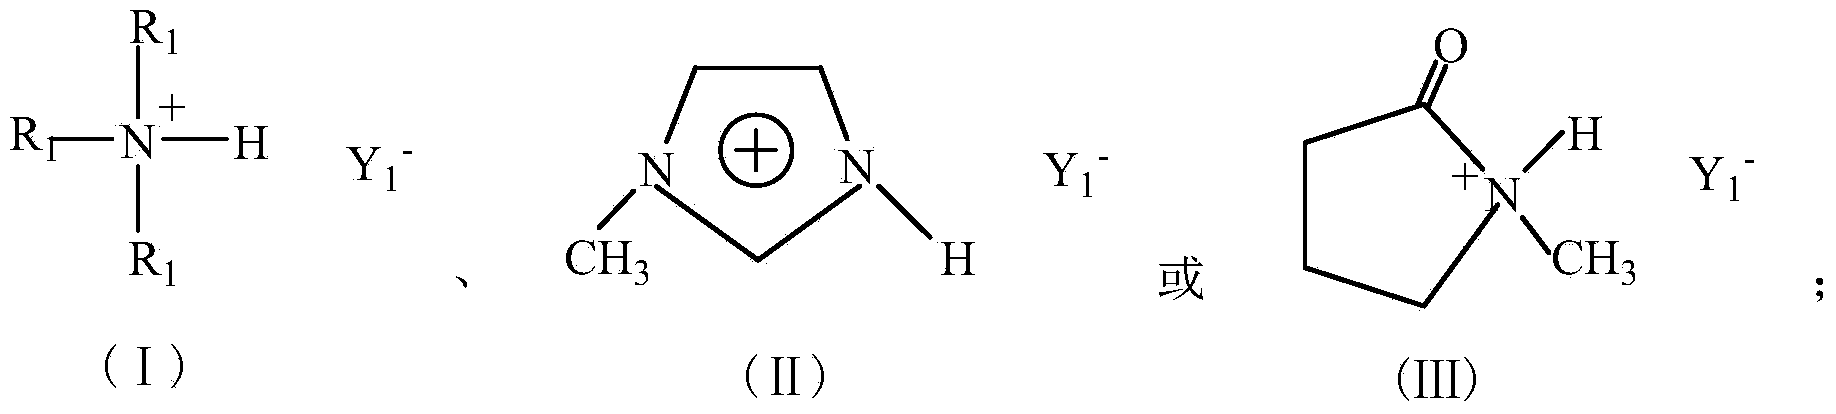 Process for synthesizing nitrocyclohexane by liquid phase nitration